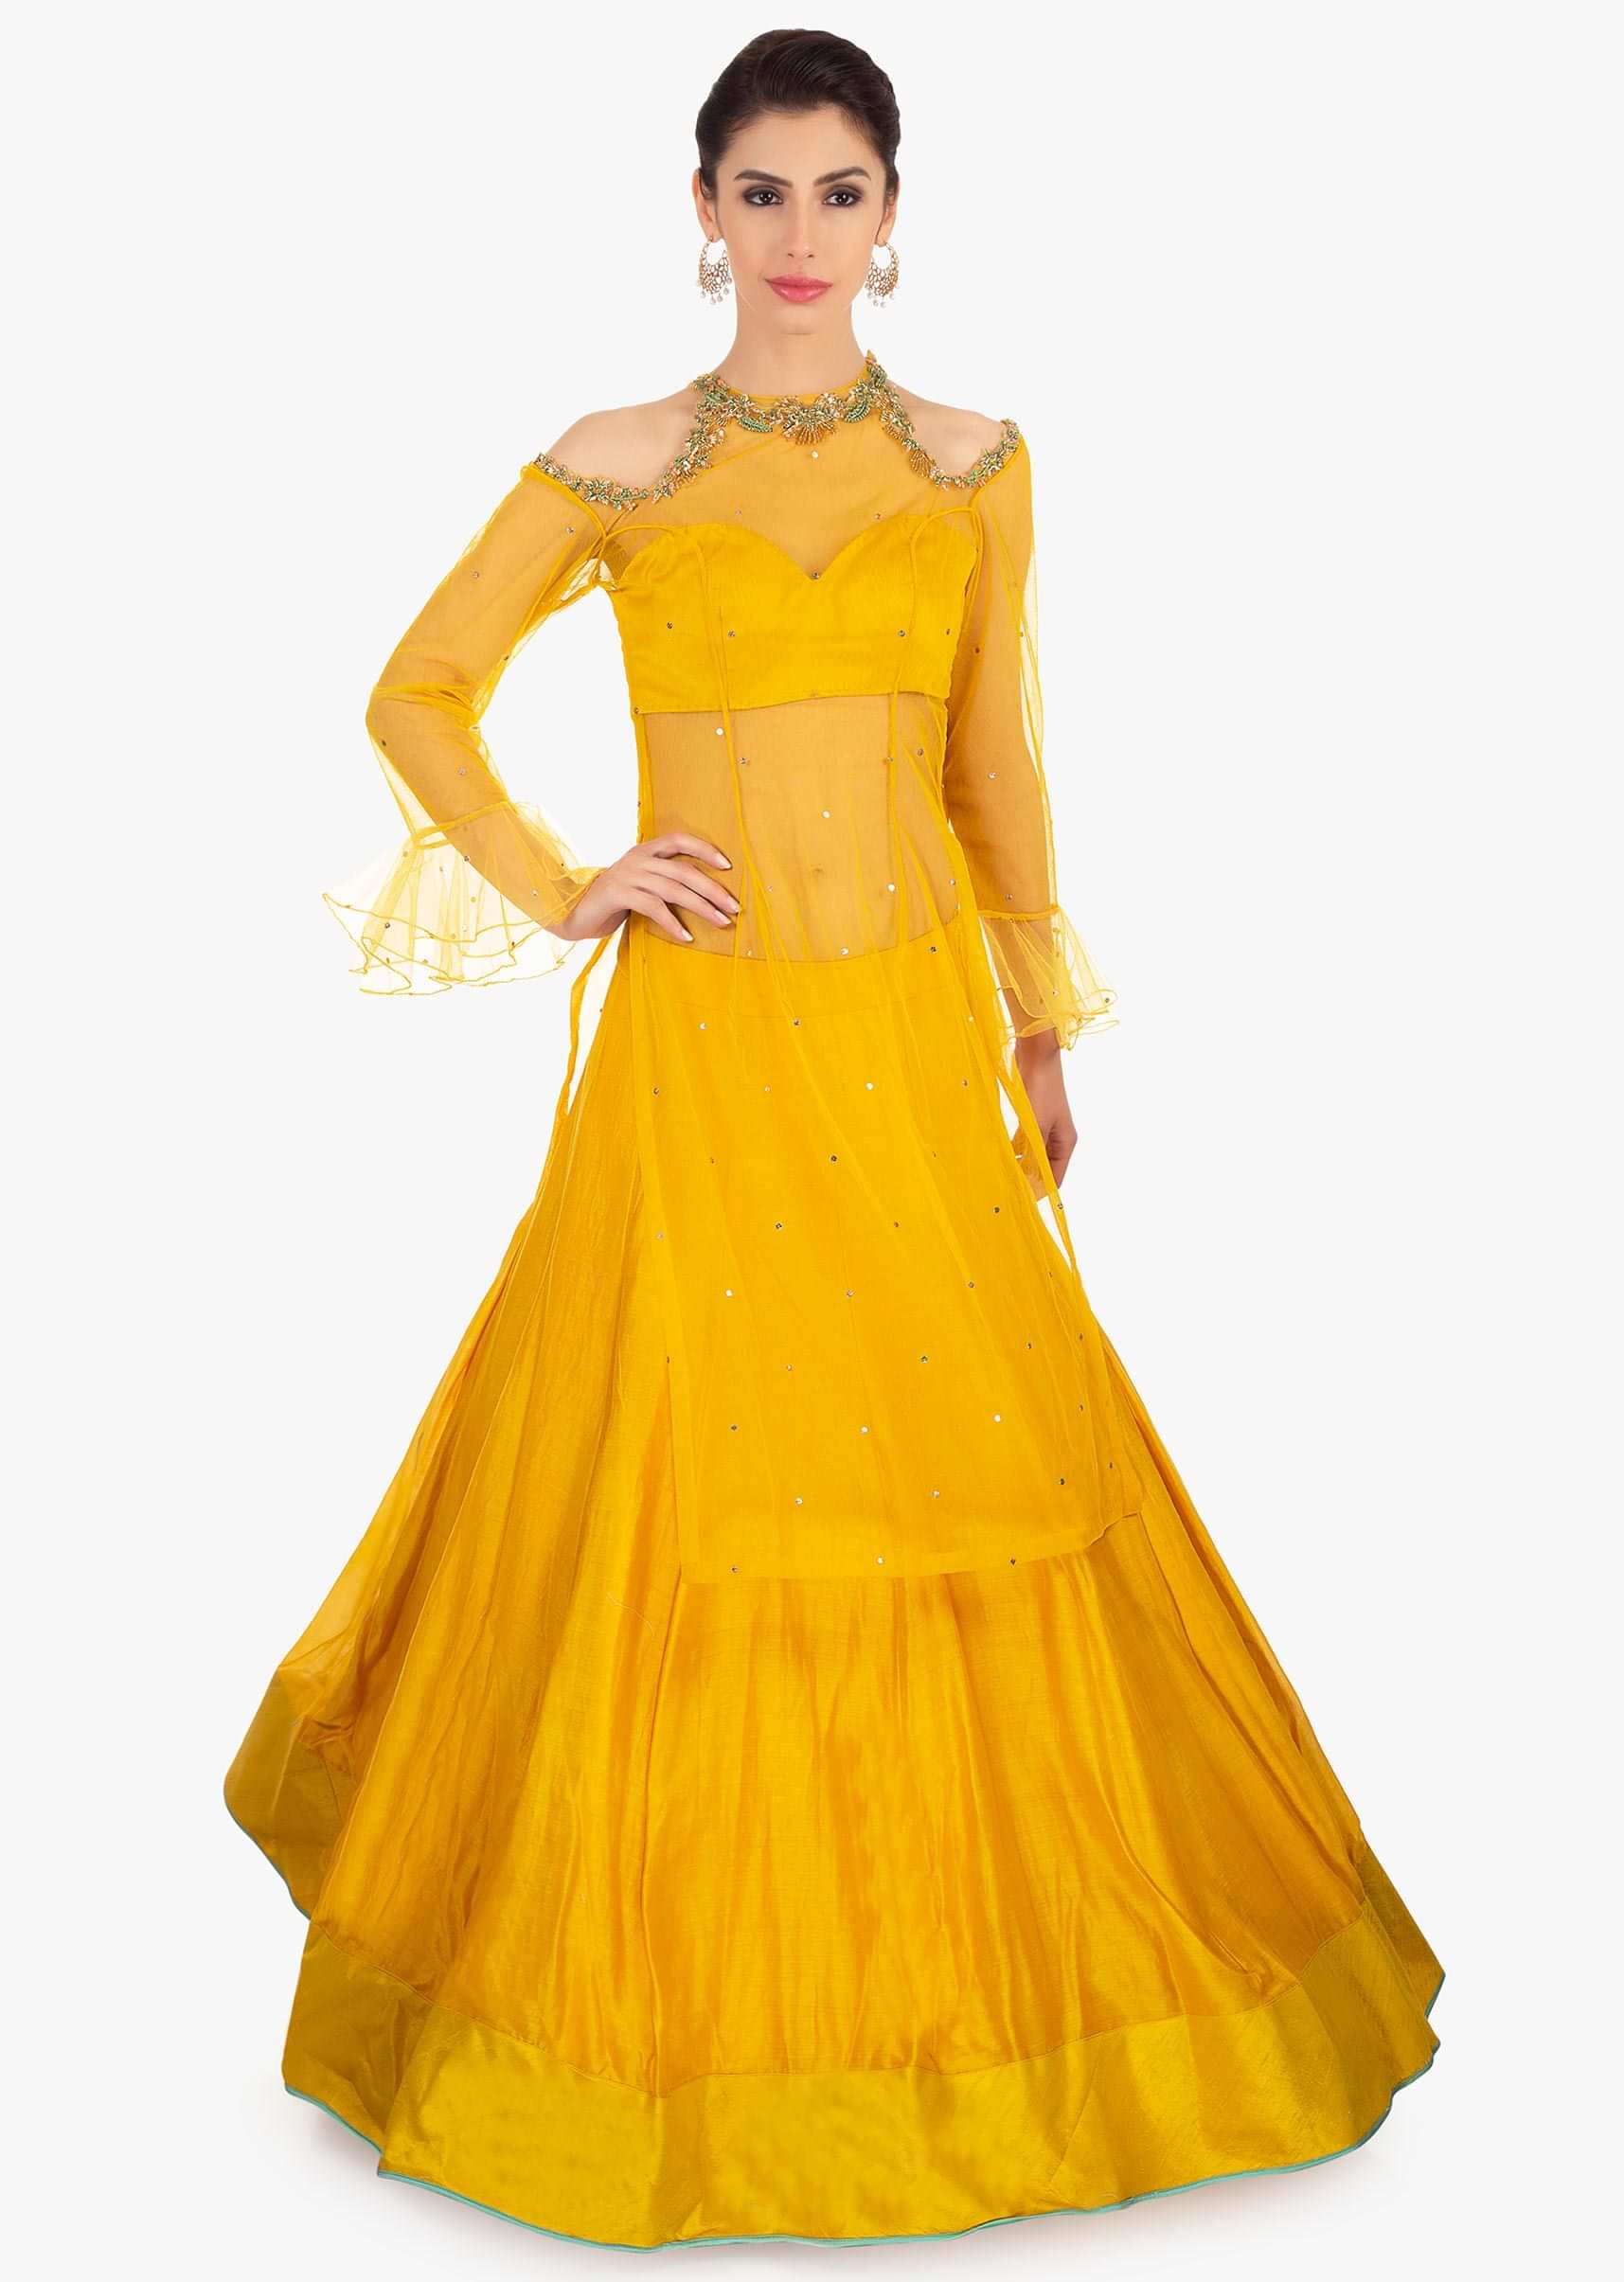 Mustard cotton skirt in kali with long net top